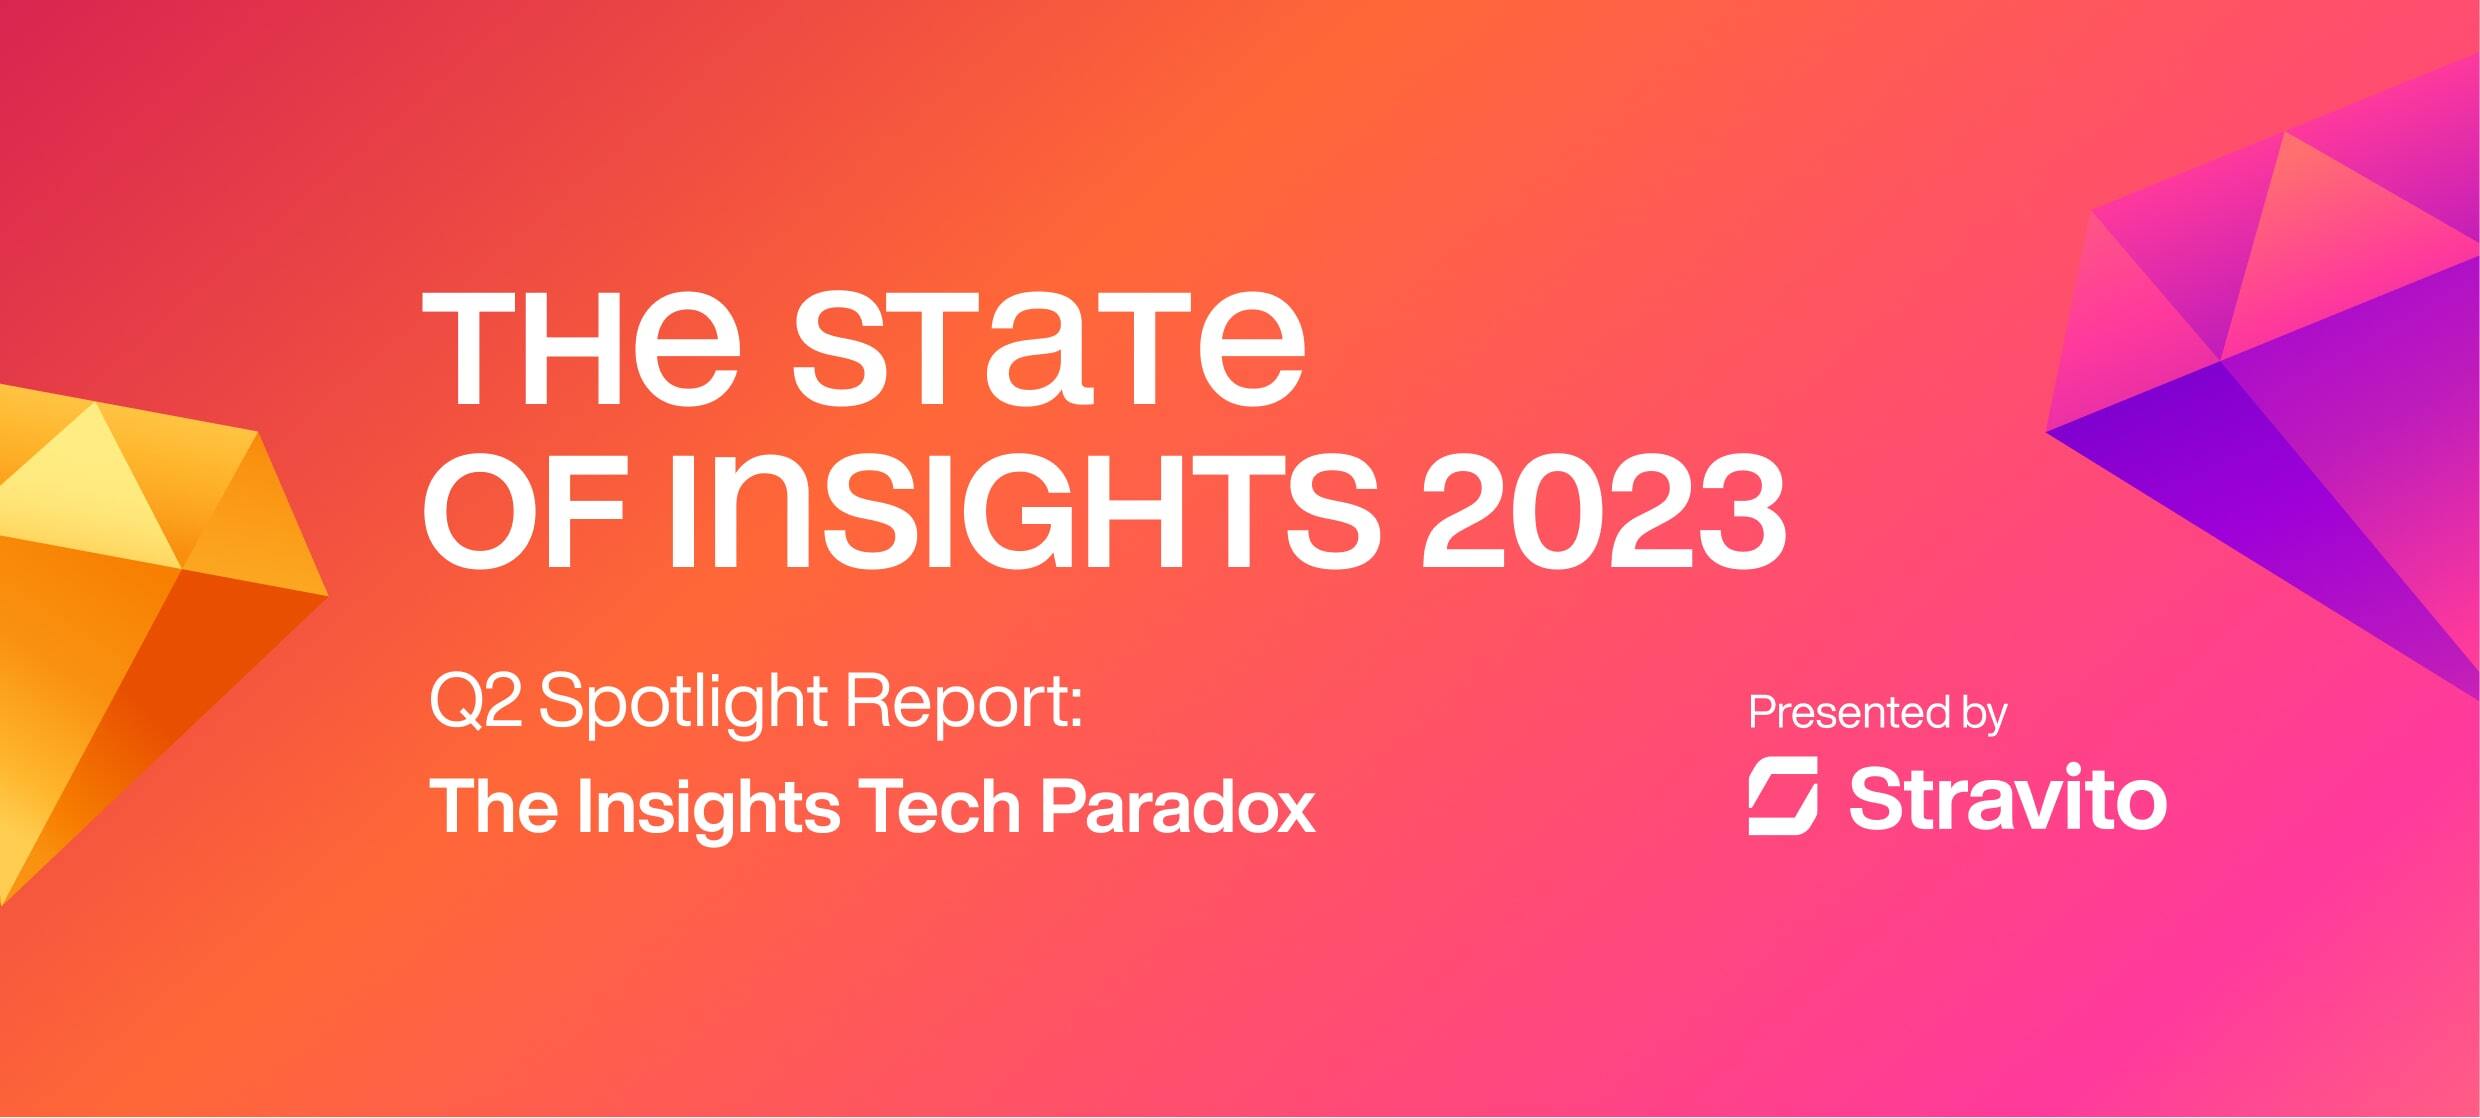 The State of Insights Q2 Spotlight Report: The Insights Tech Paradox